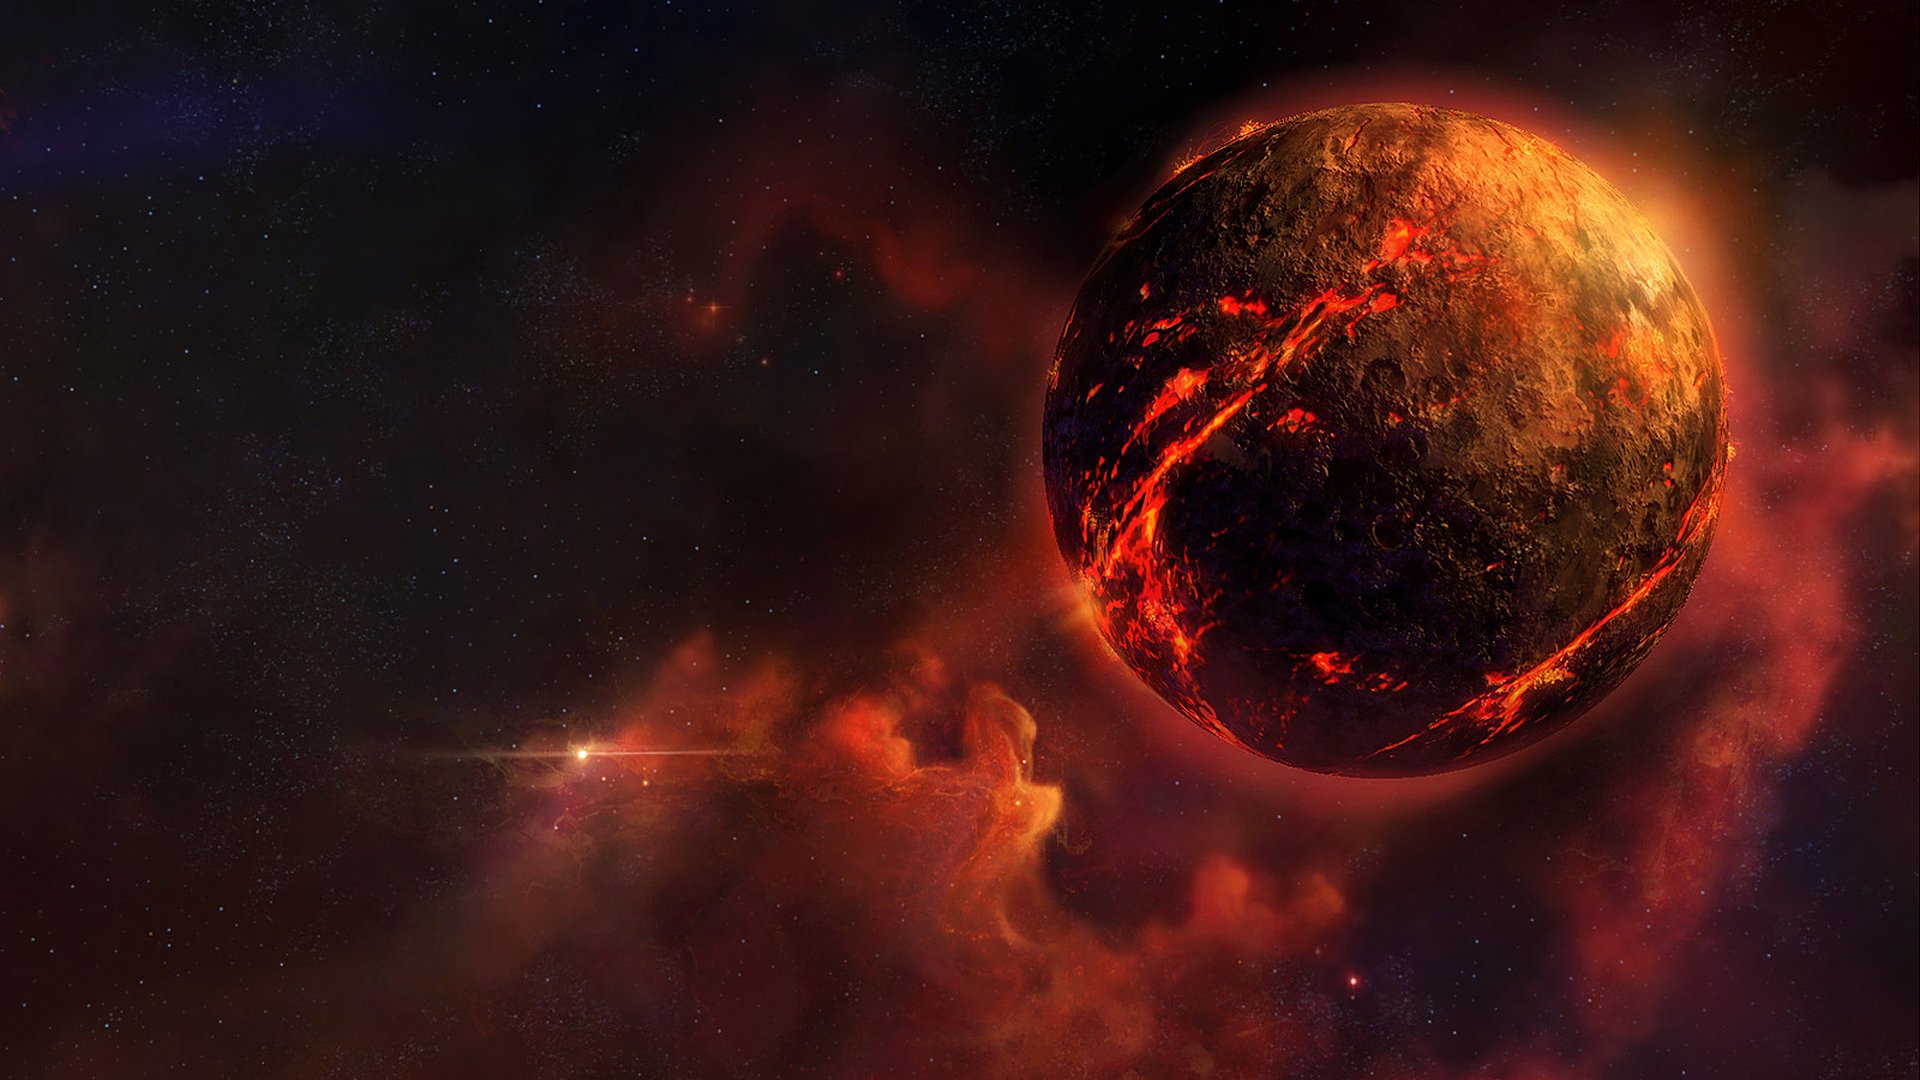 starcraft 2 wallpaper 1920x1080,outer space,planet,astronomical object,atmosphere,space